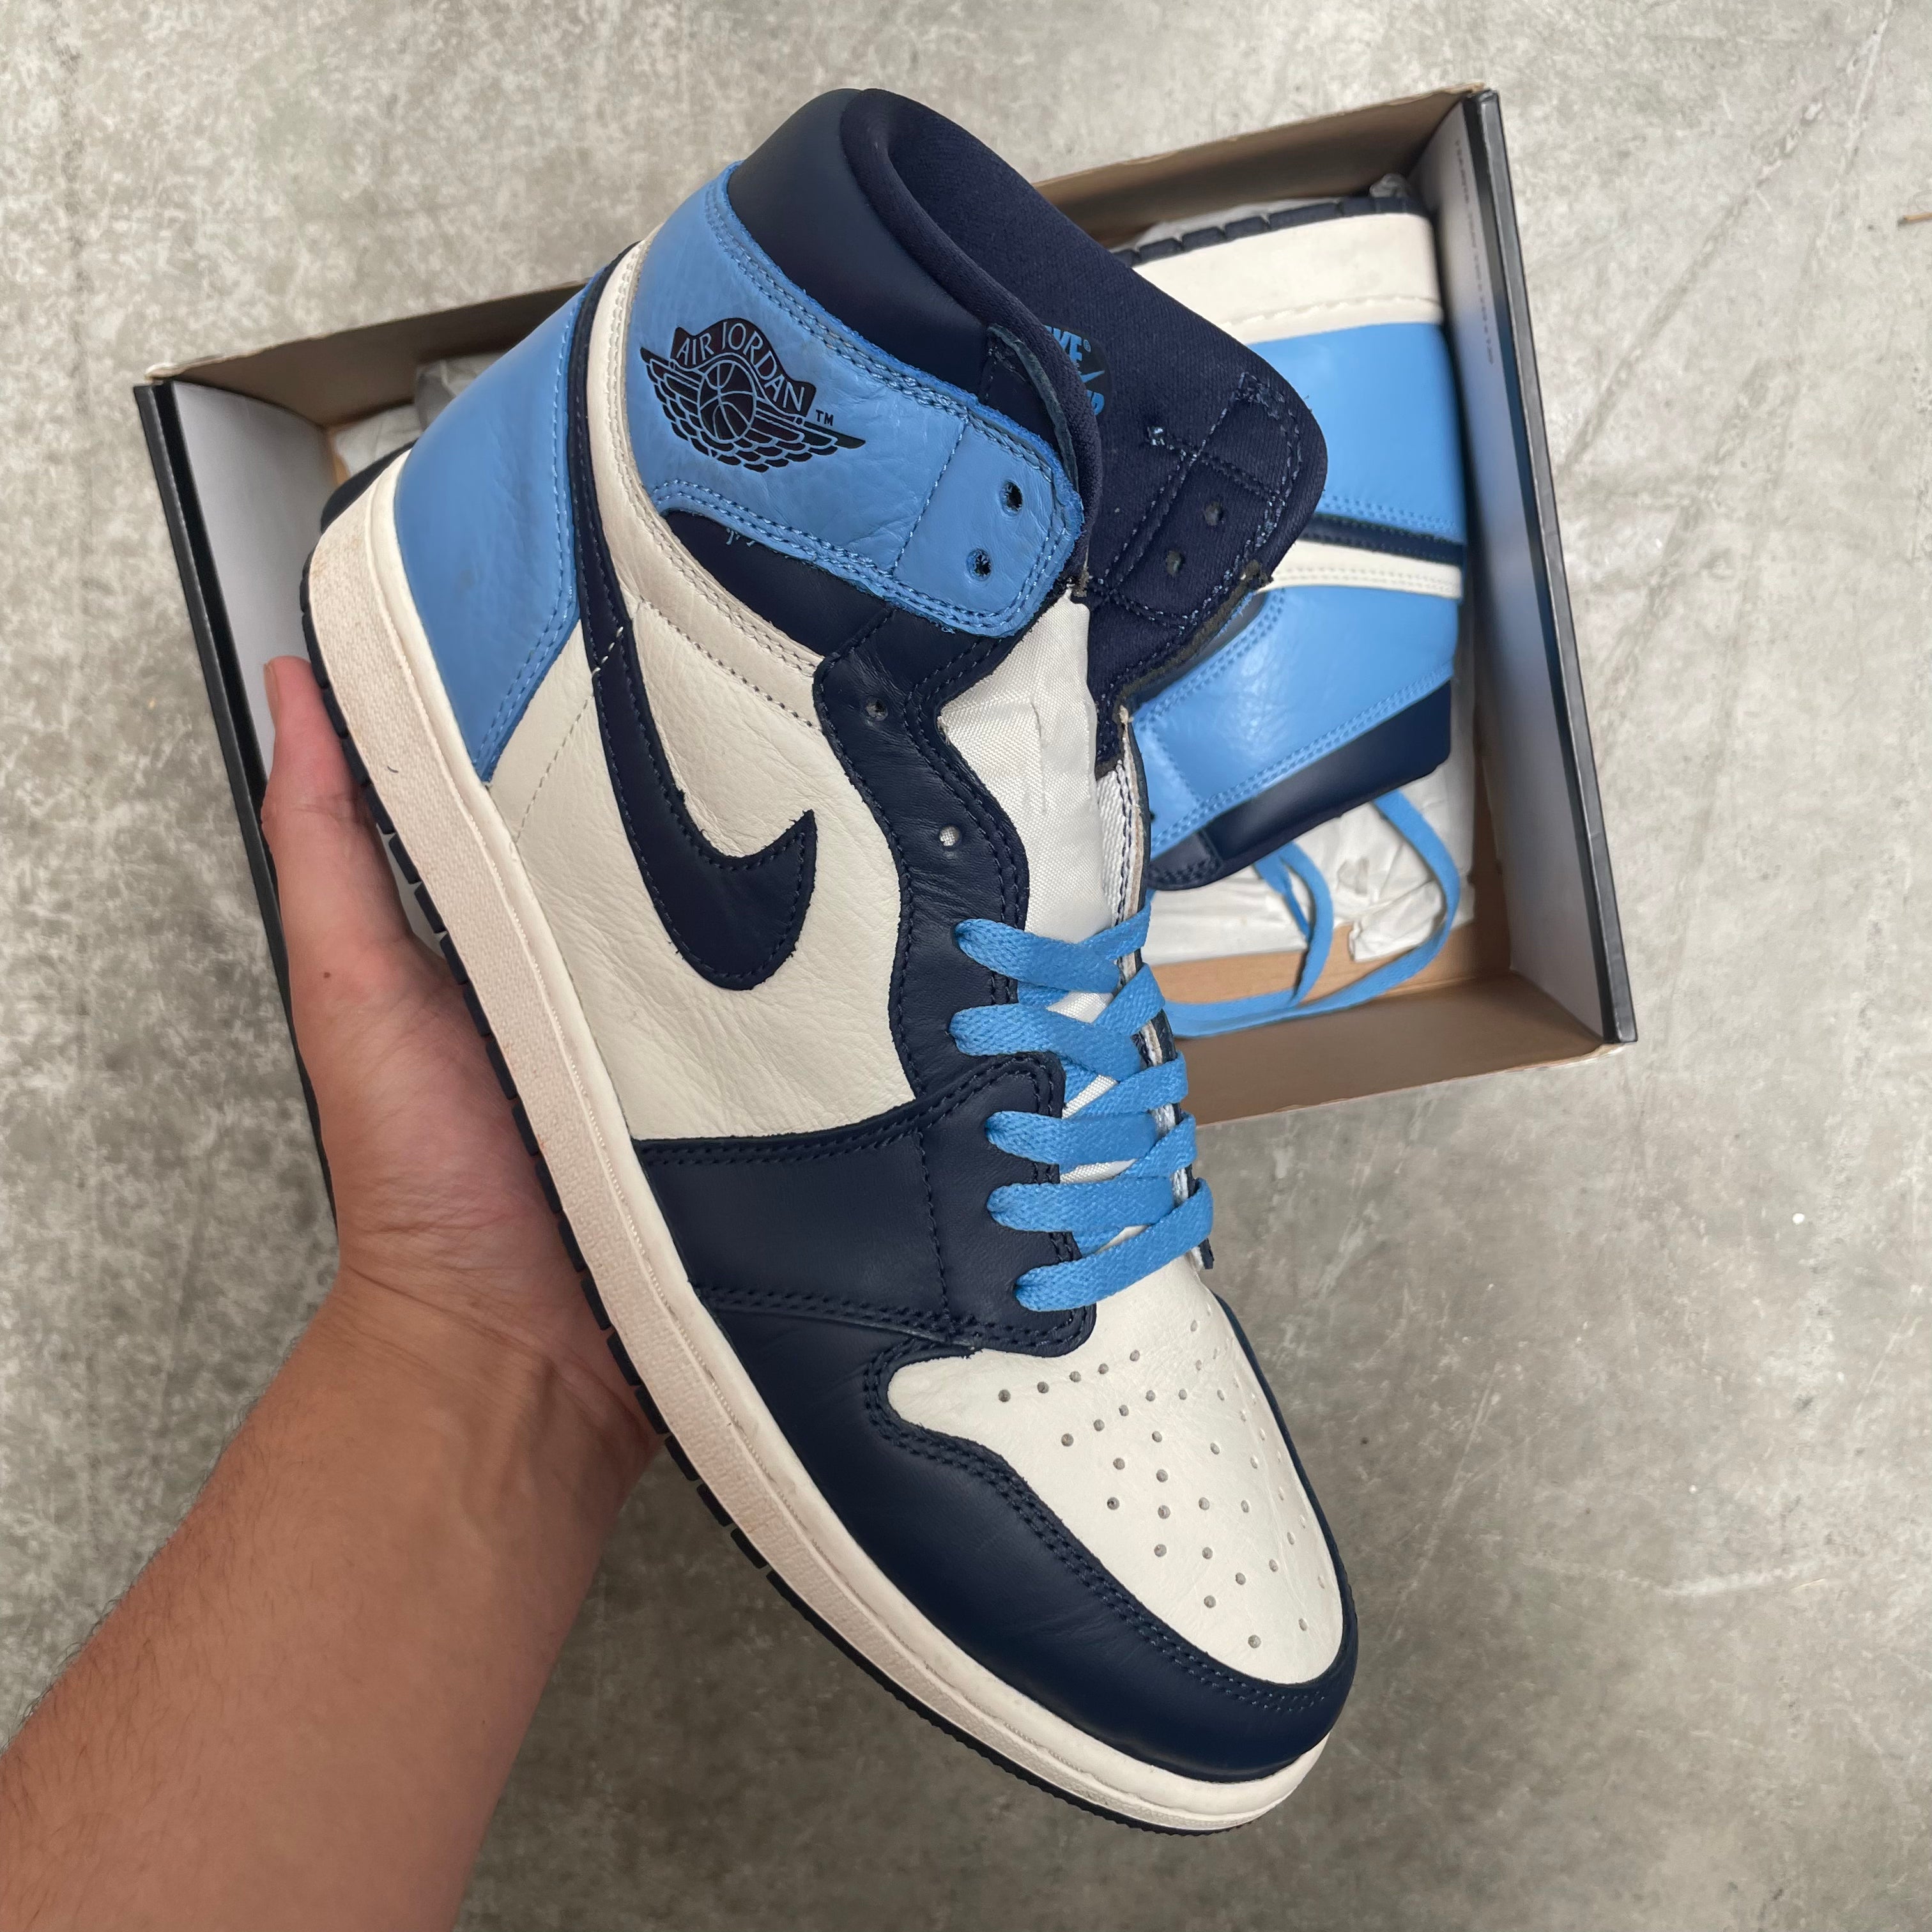 Jordan 1 Retro High Obsidian UNC US12 – Curated by Charbel